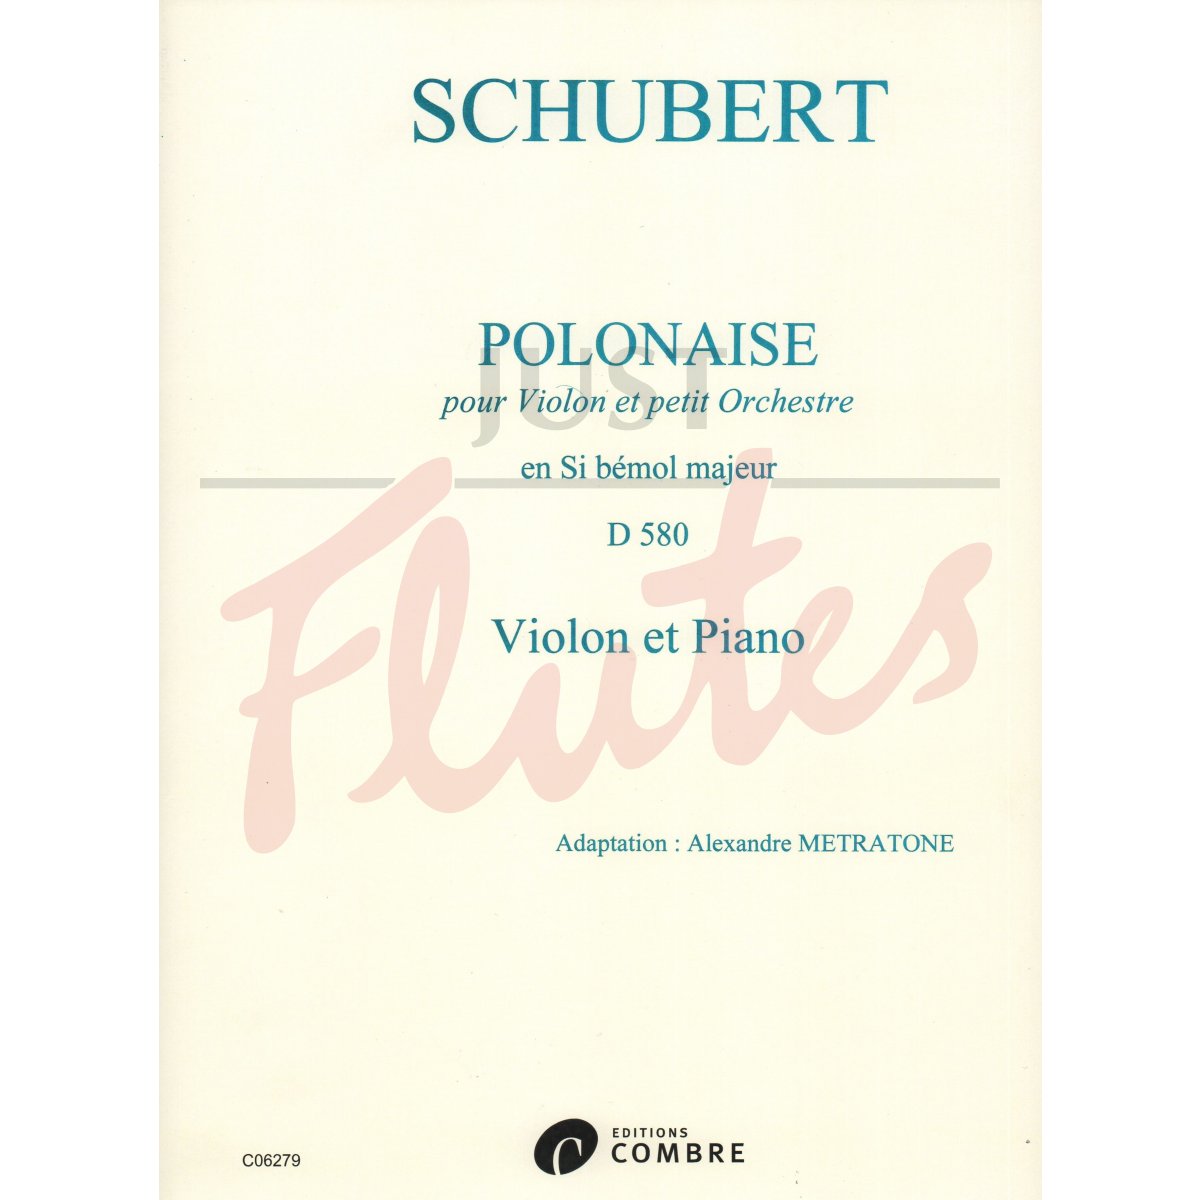 Polonaise in Bb Major for Violin and Piano